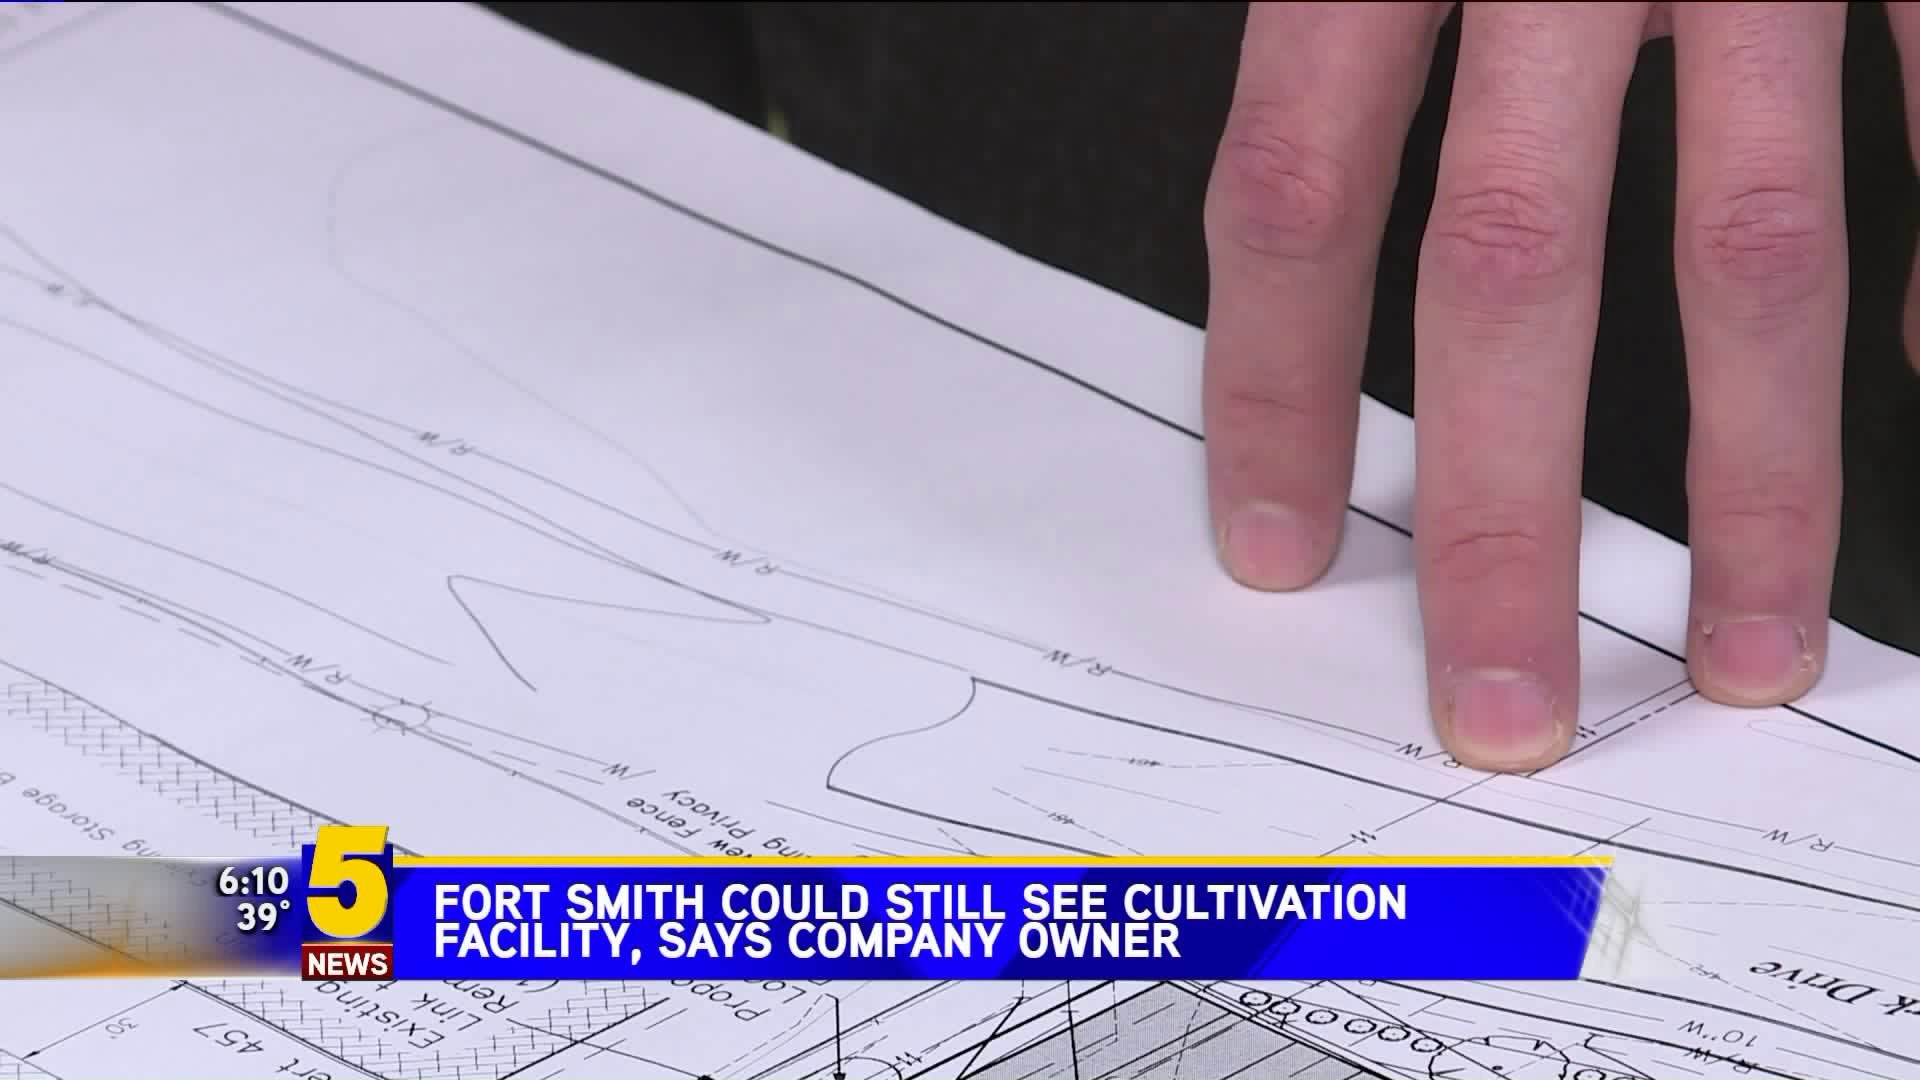 Fort Smith Could Still See Cultivation Facility, Says Company Owner